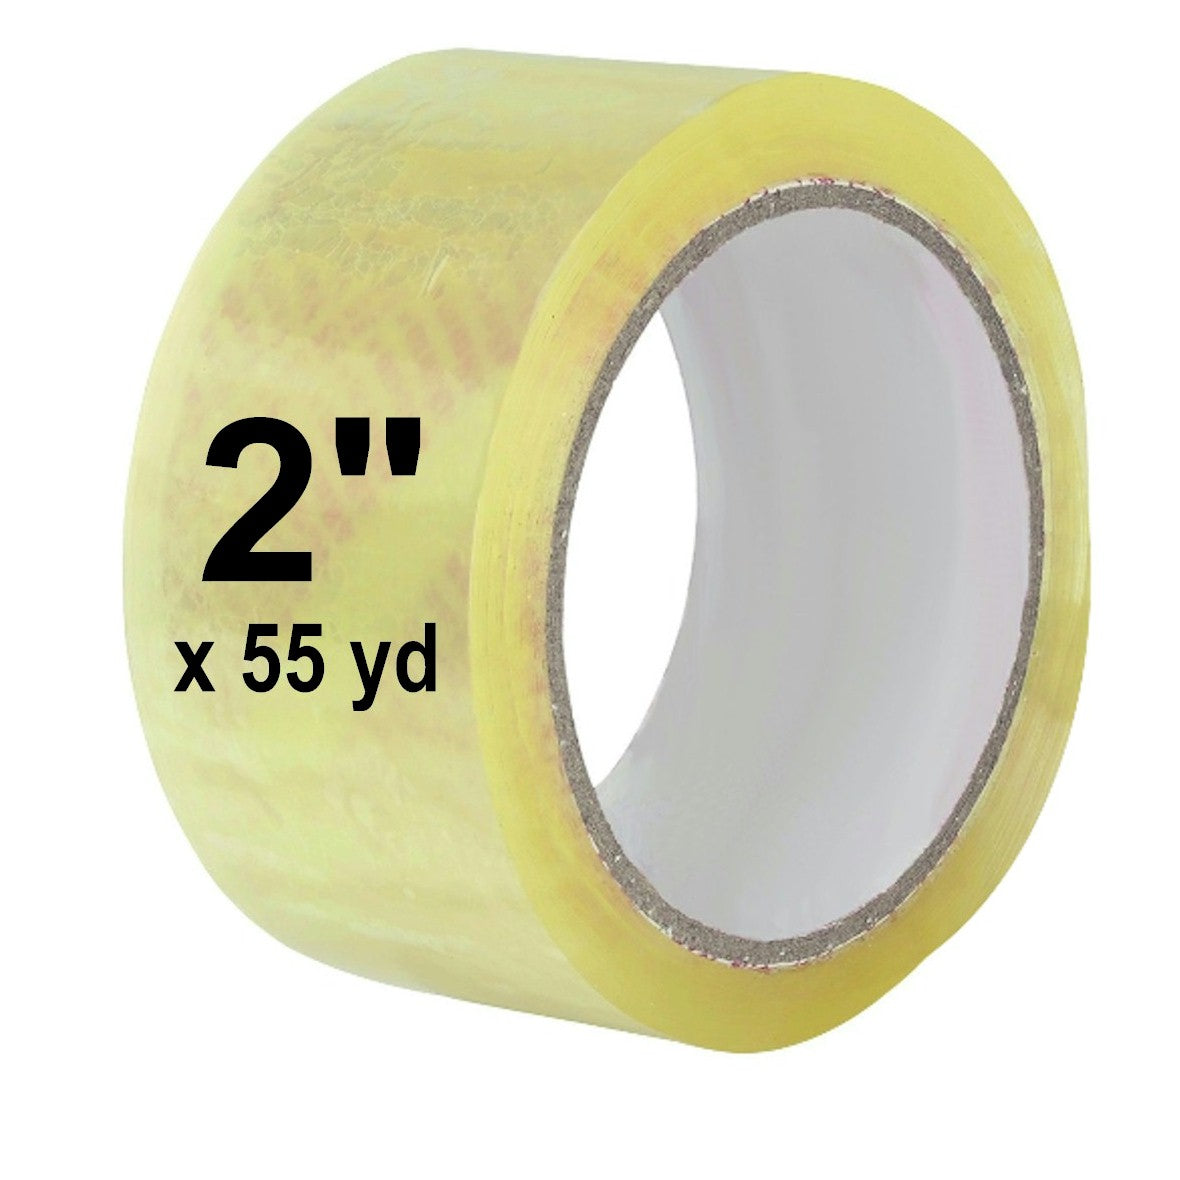 Clear Carton Sealing Tape, Crystal Clear, 2 x 55 yds., 2.6 Mil Thick for  $4.29 Online